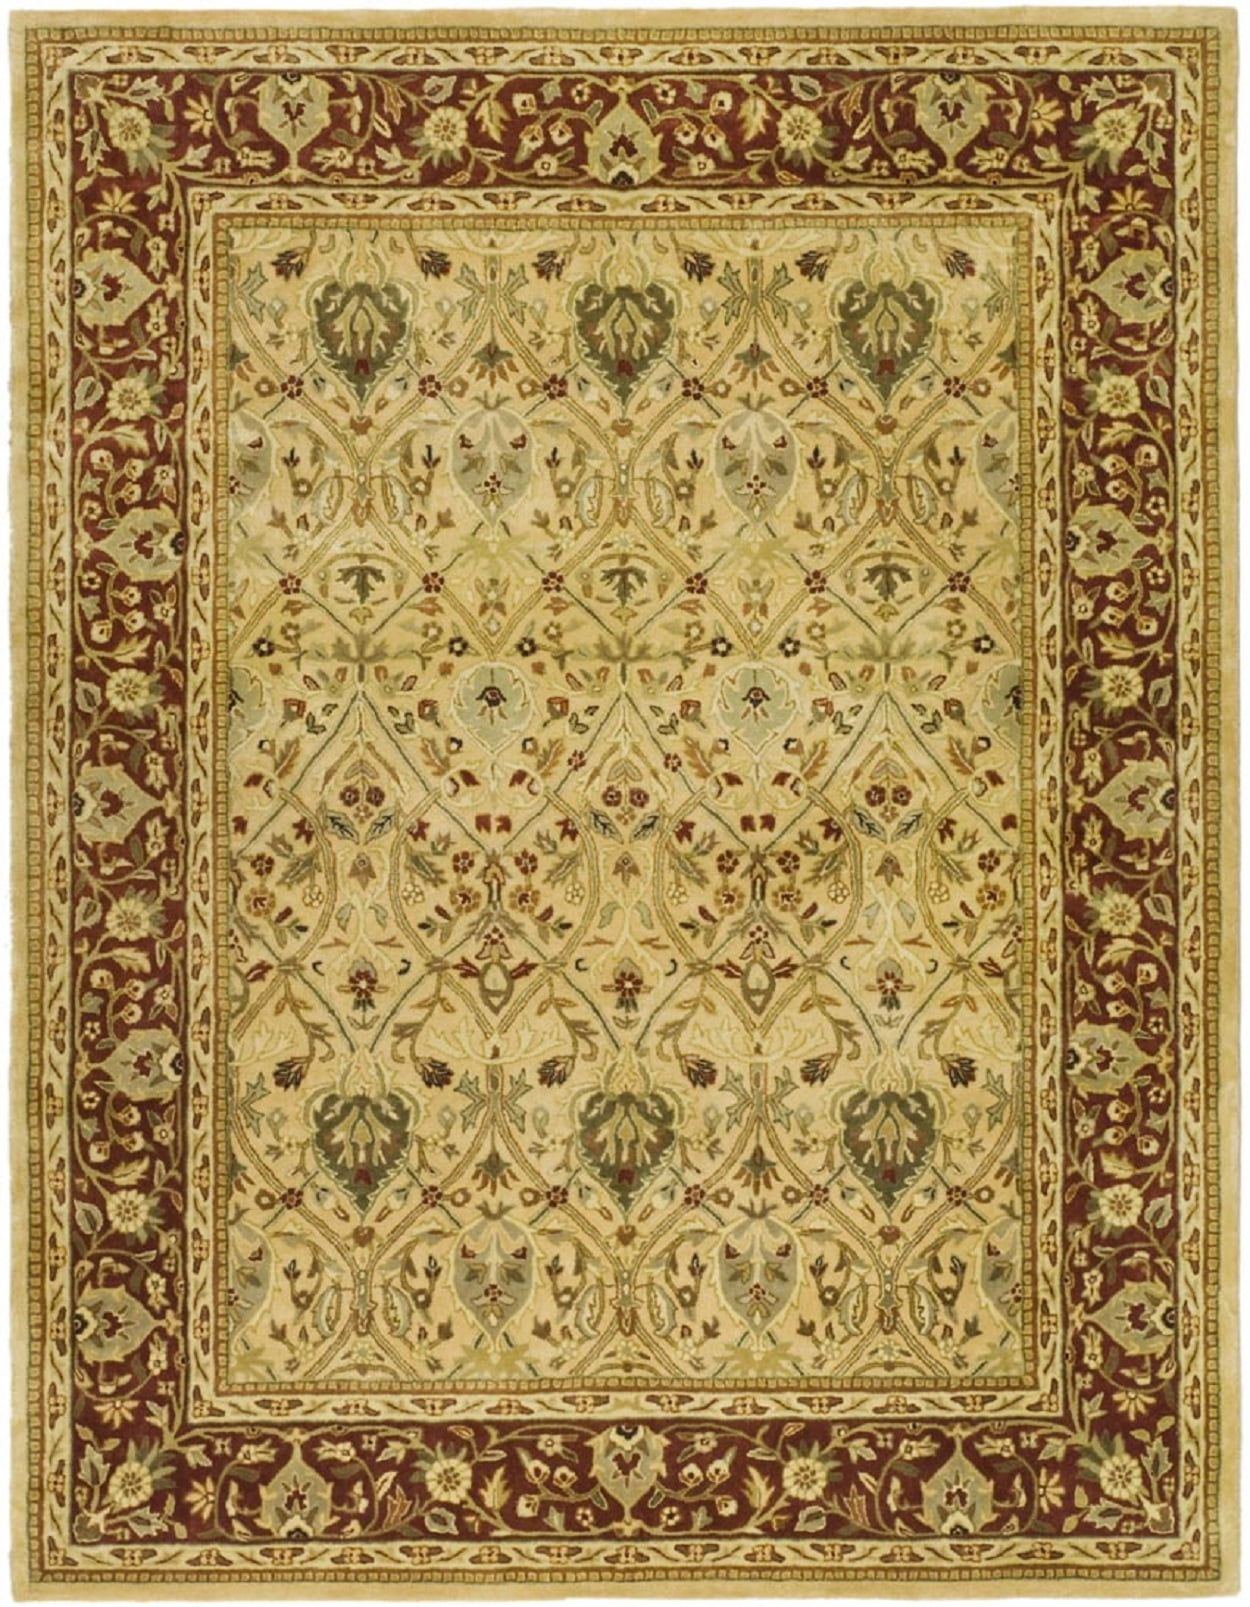 Ivory and Rust Hand-Tufted Wool Rectangular Area Rug, 54" x 16"